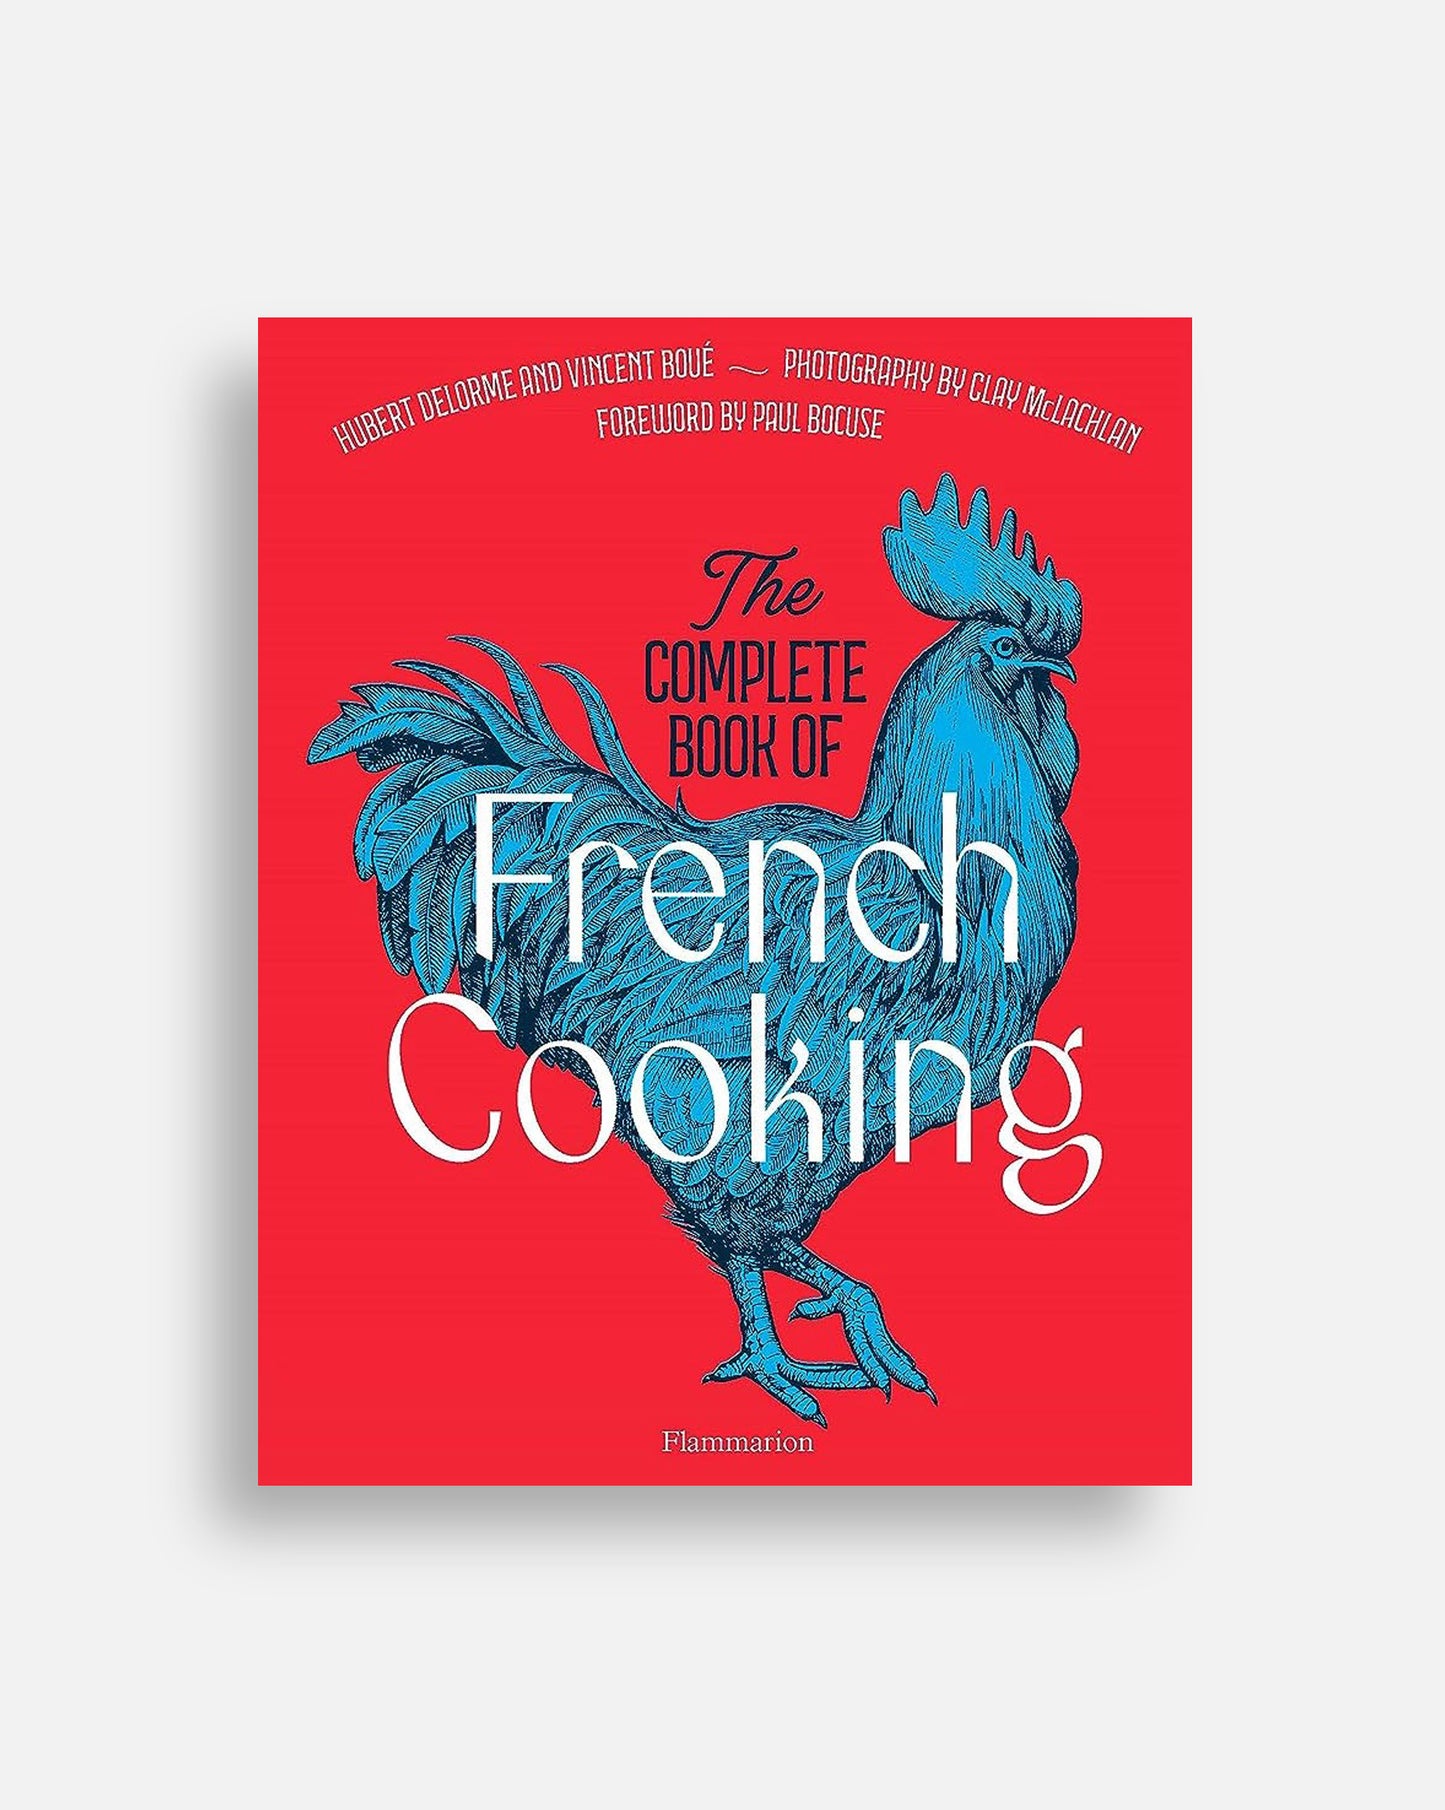 THE COMPLETE BOOK OF FRENCH COOKING